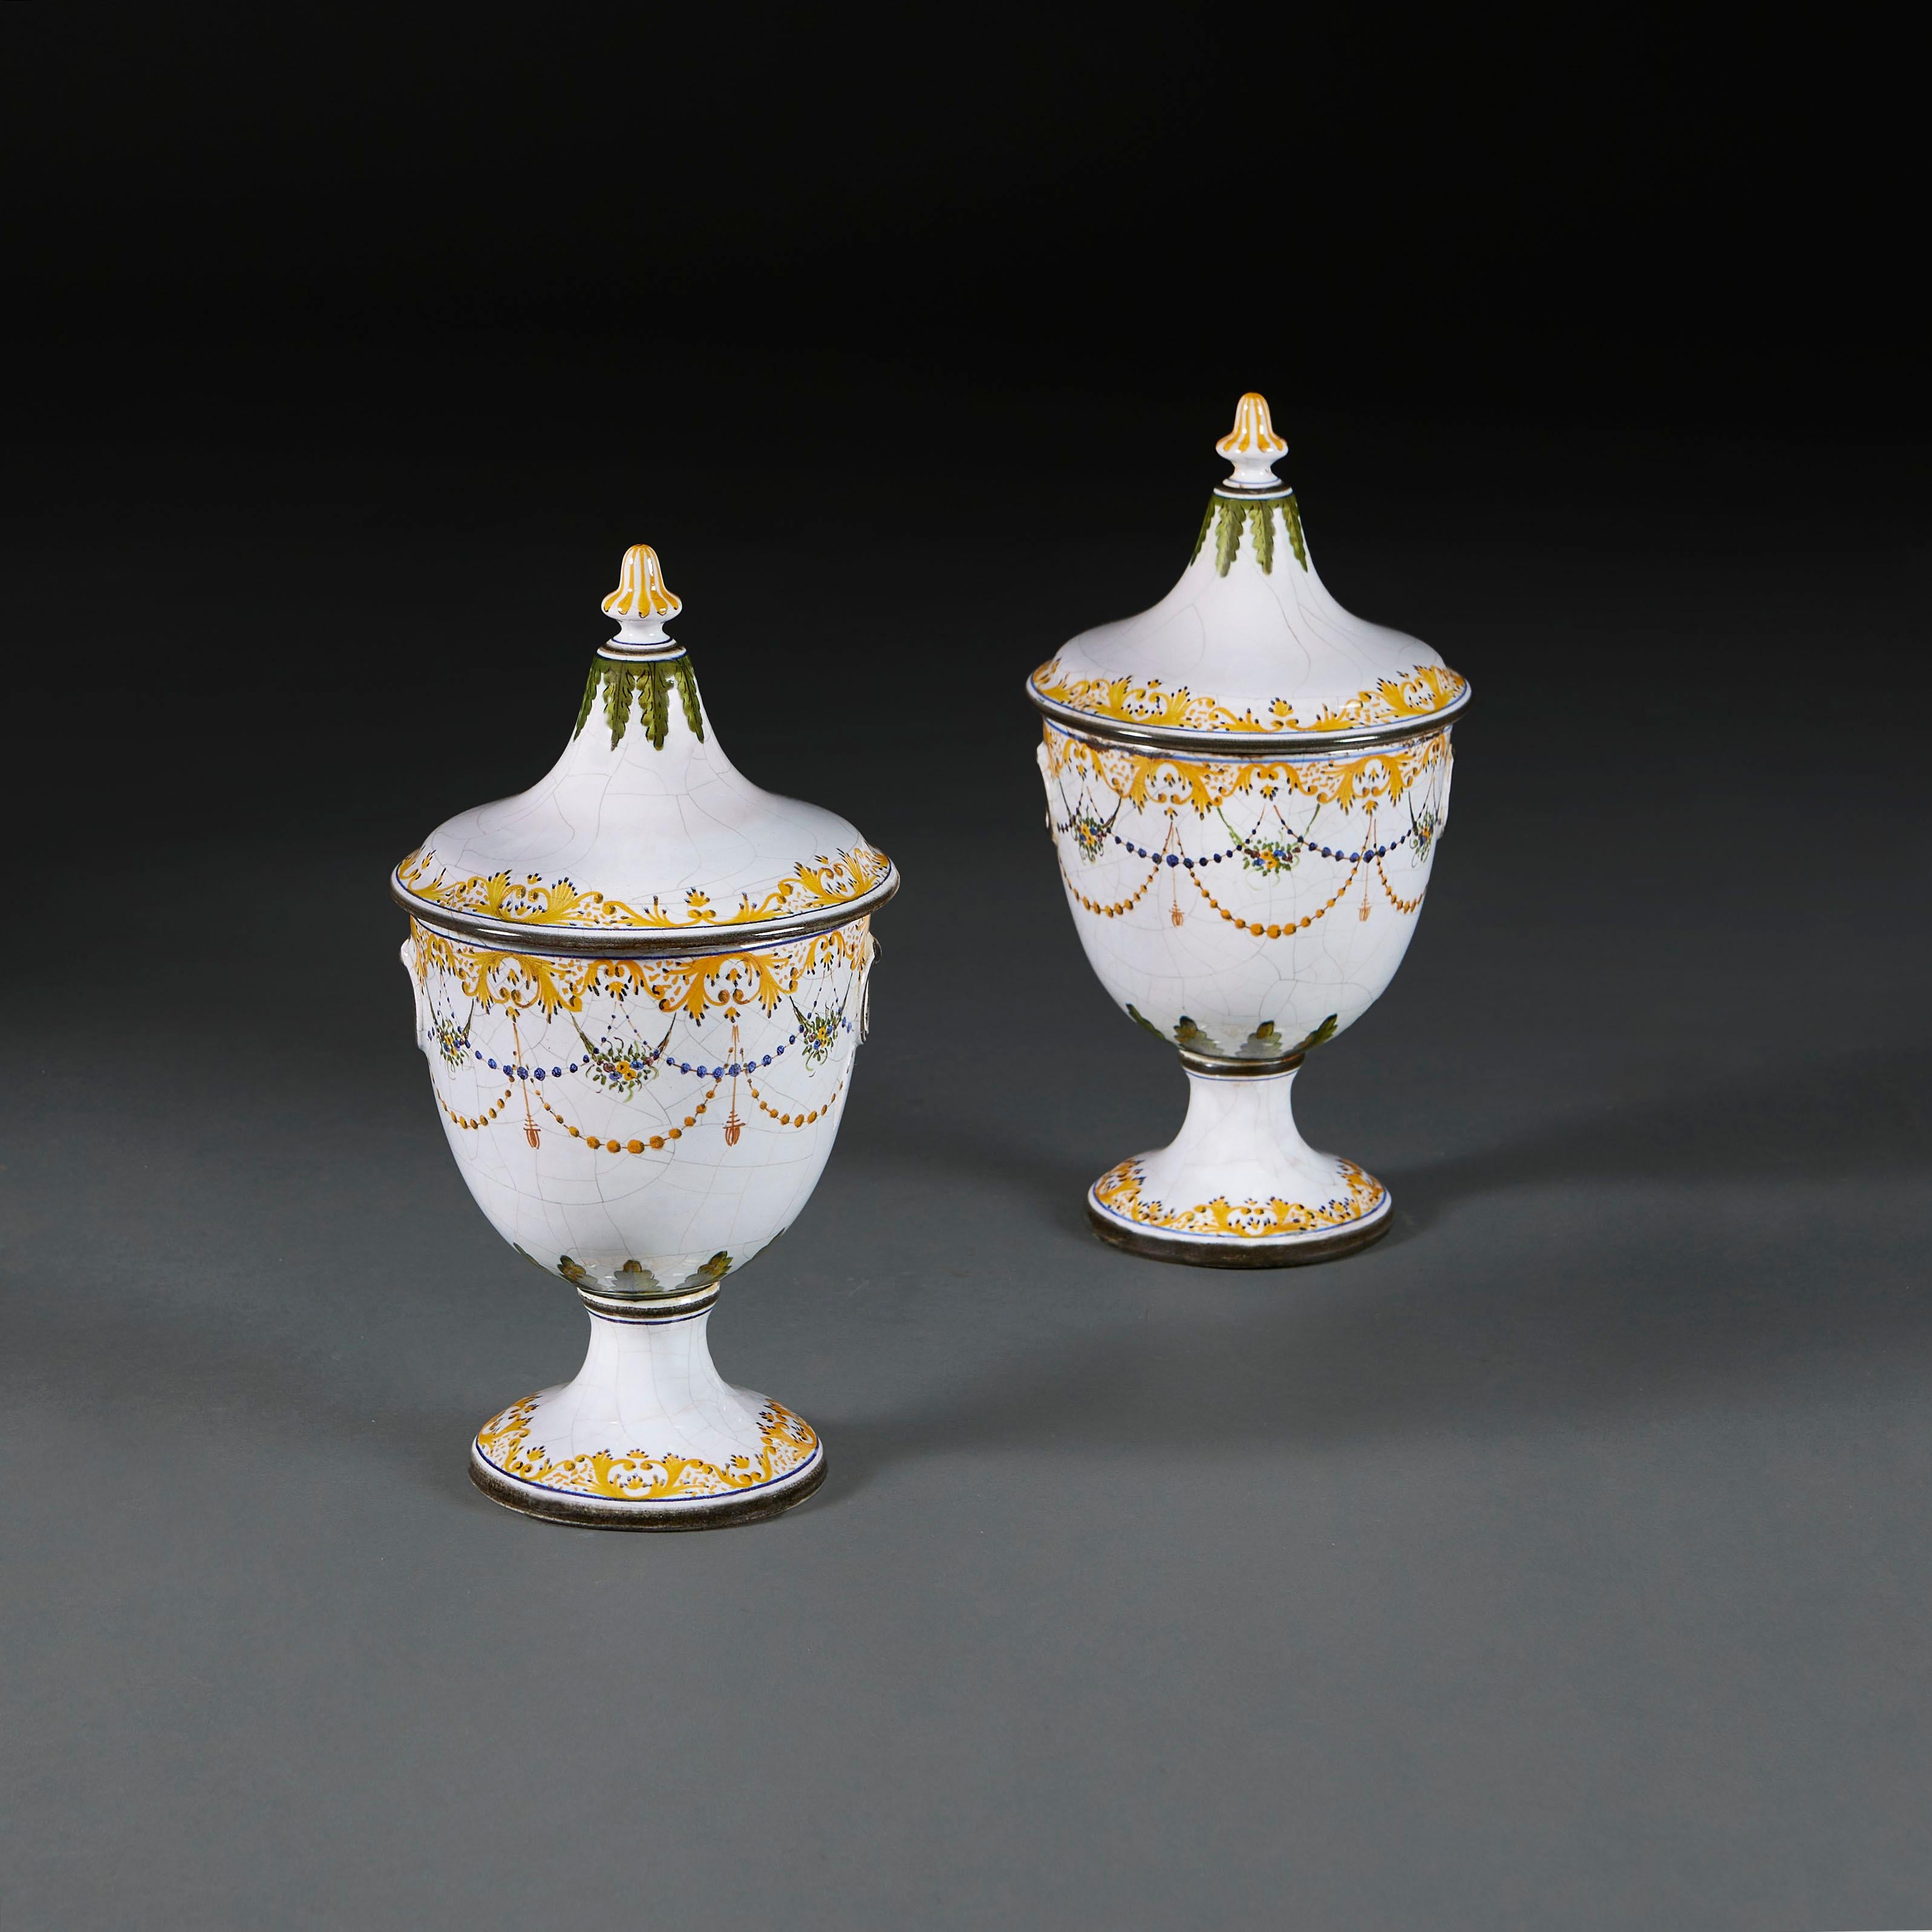 Italy, 1920

A pair of Italian faience chestnut urns, with white craquelure ground decorated with foliate garlands, scrolling yellow borders and green foliage, surmounted by a striped finial. 

Height 32.00cm
Diameter 16.00cm